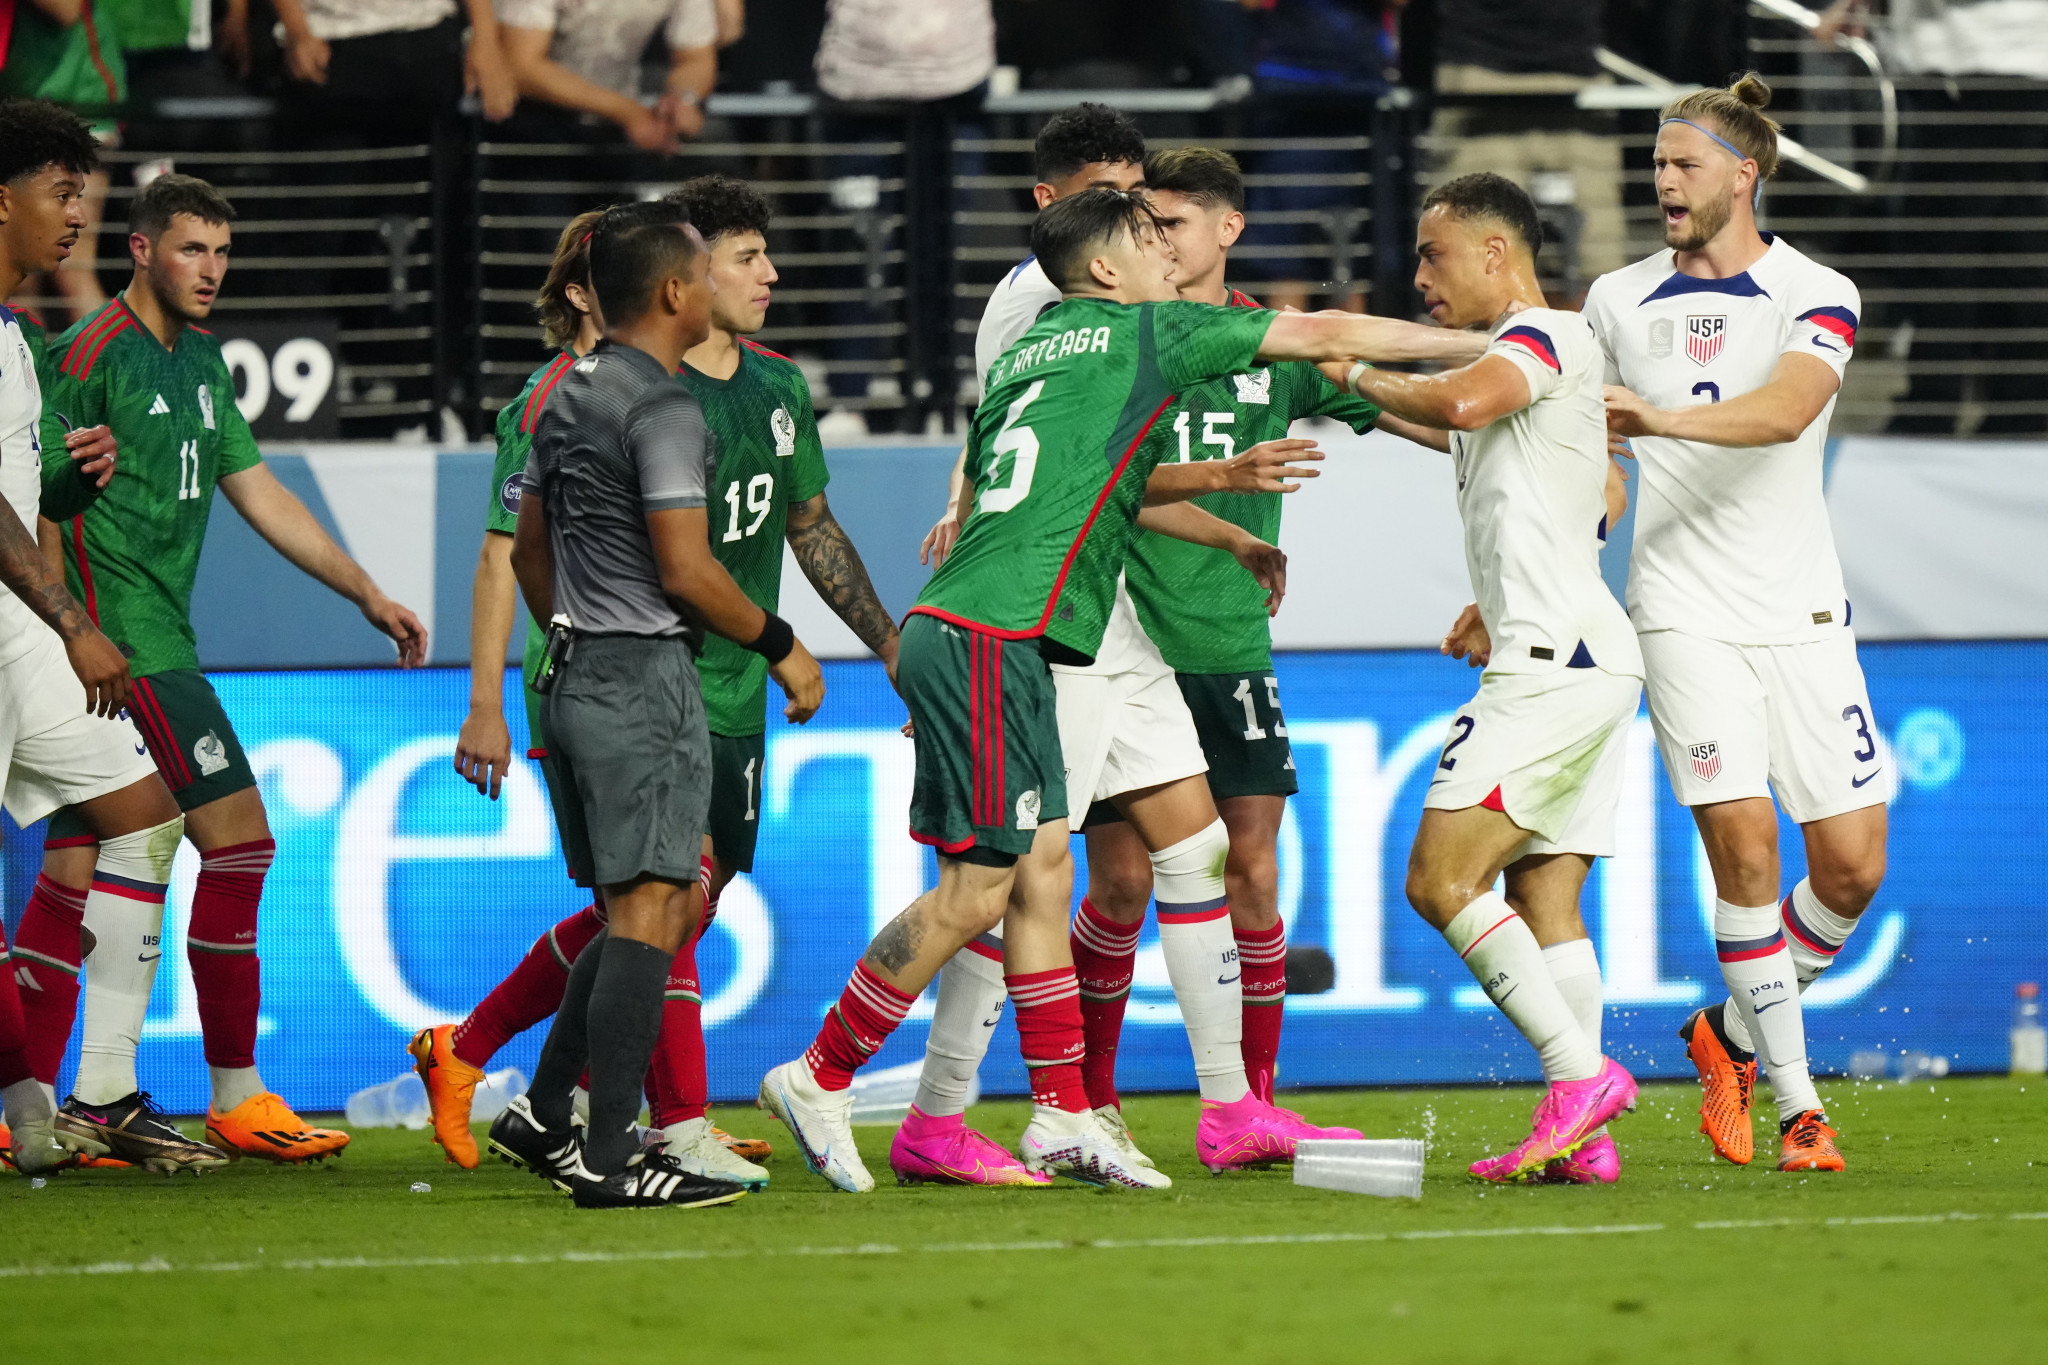 The match between the United States and Mexico was marred by brawls and homophobic chants ©Getty Images